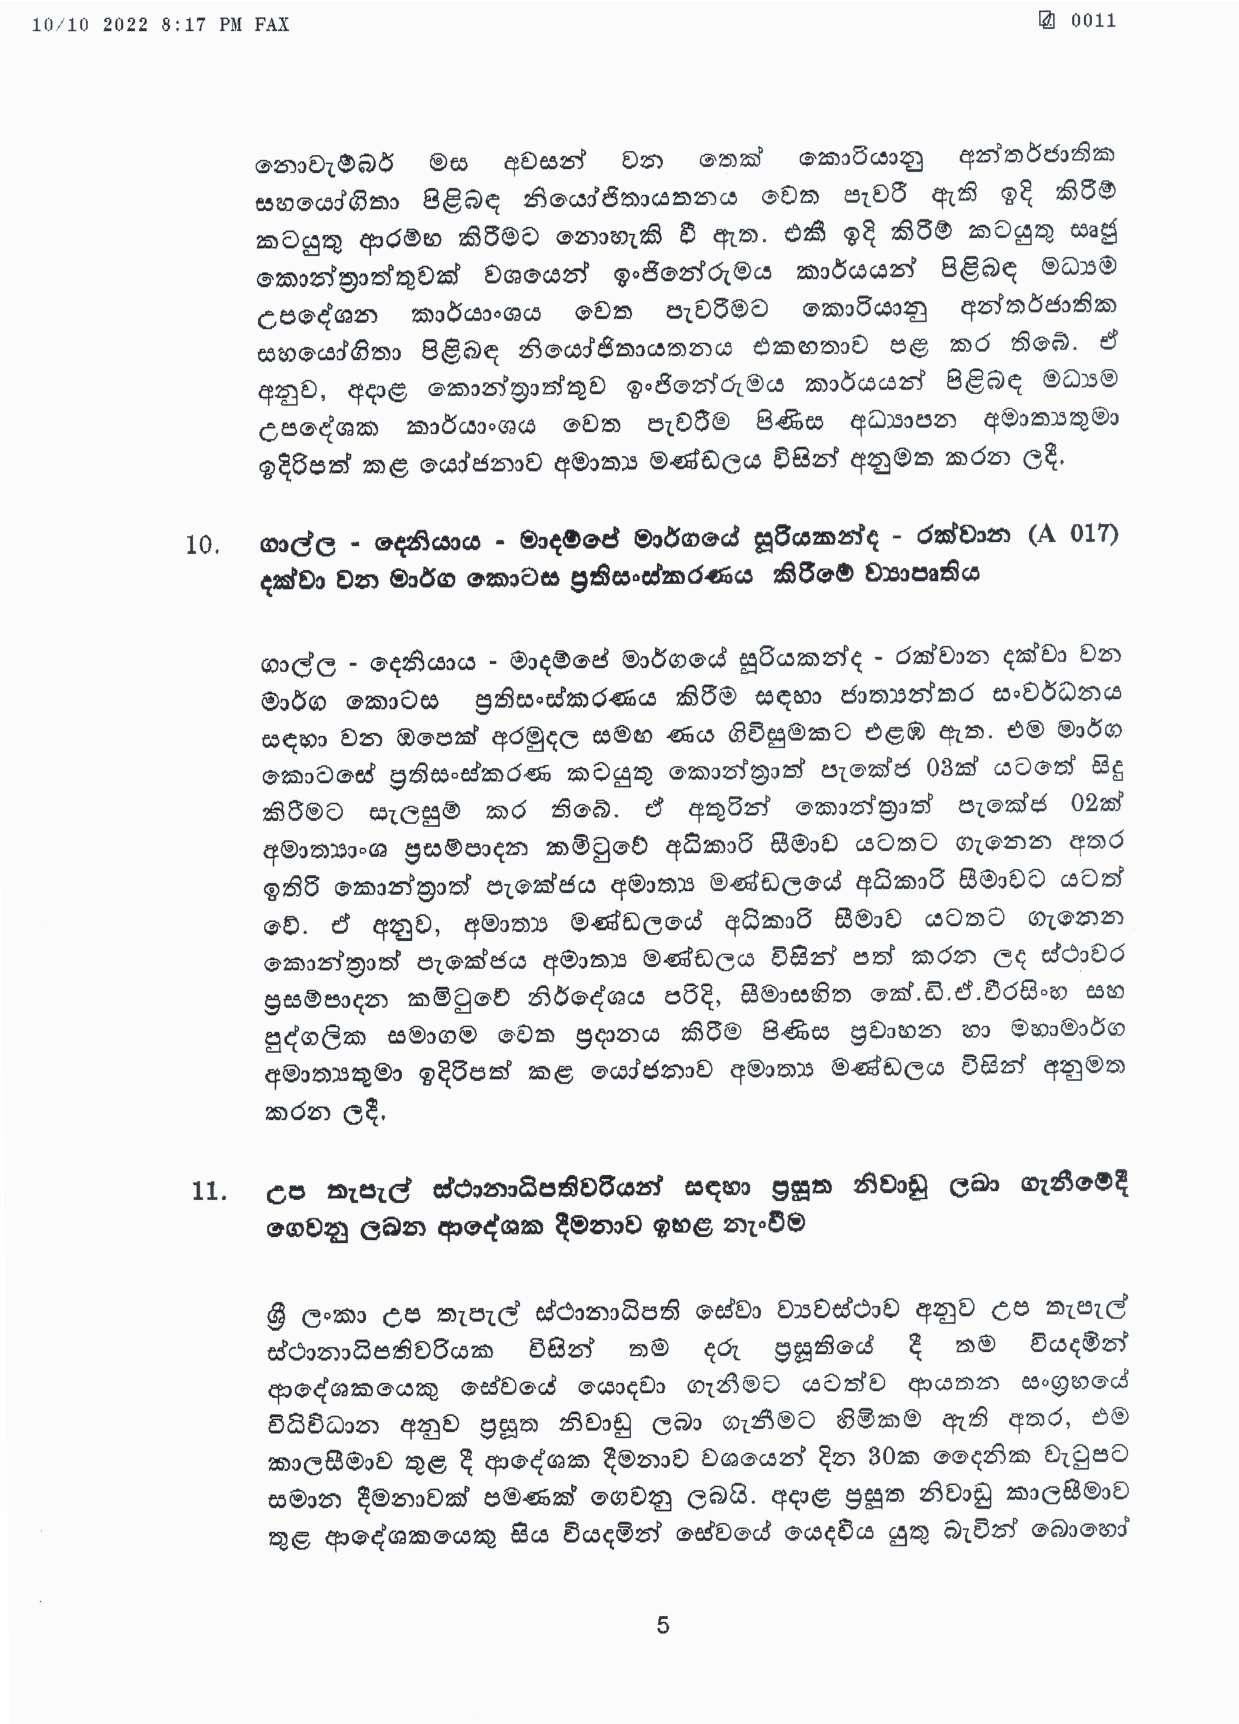 Cabinet Decision on 10.10.2022 page 005